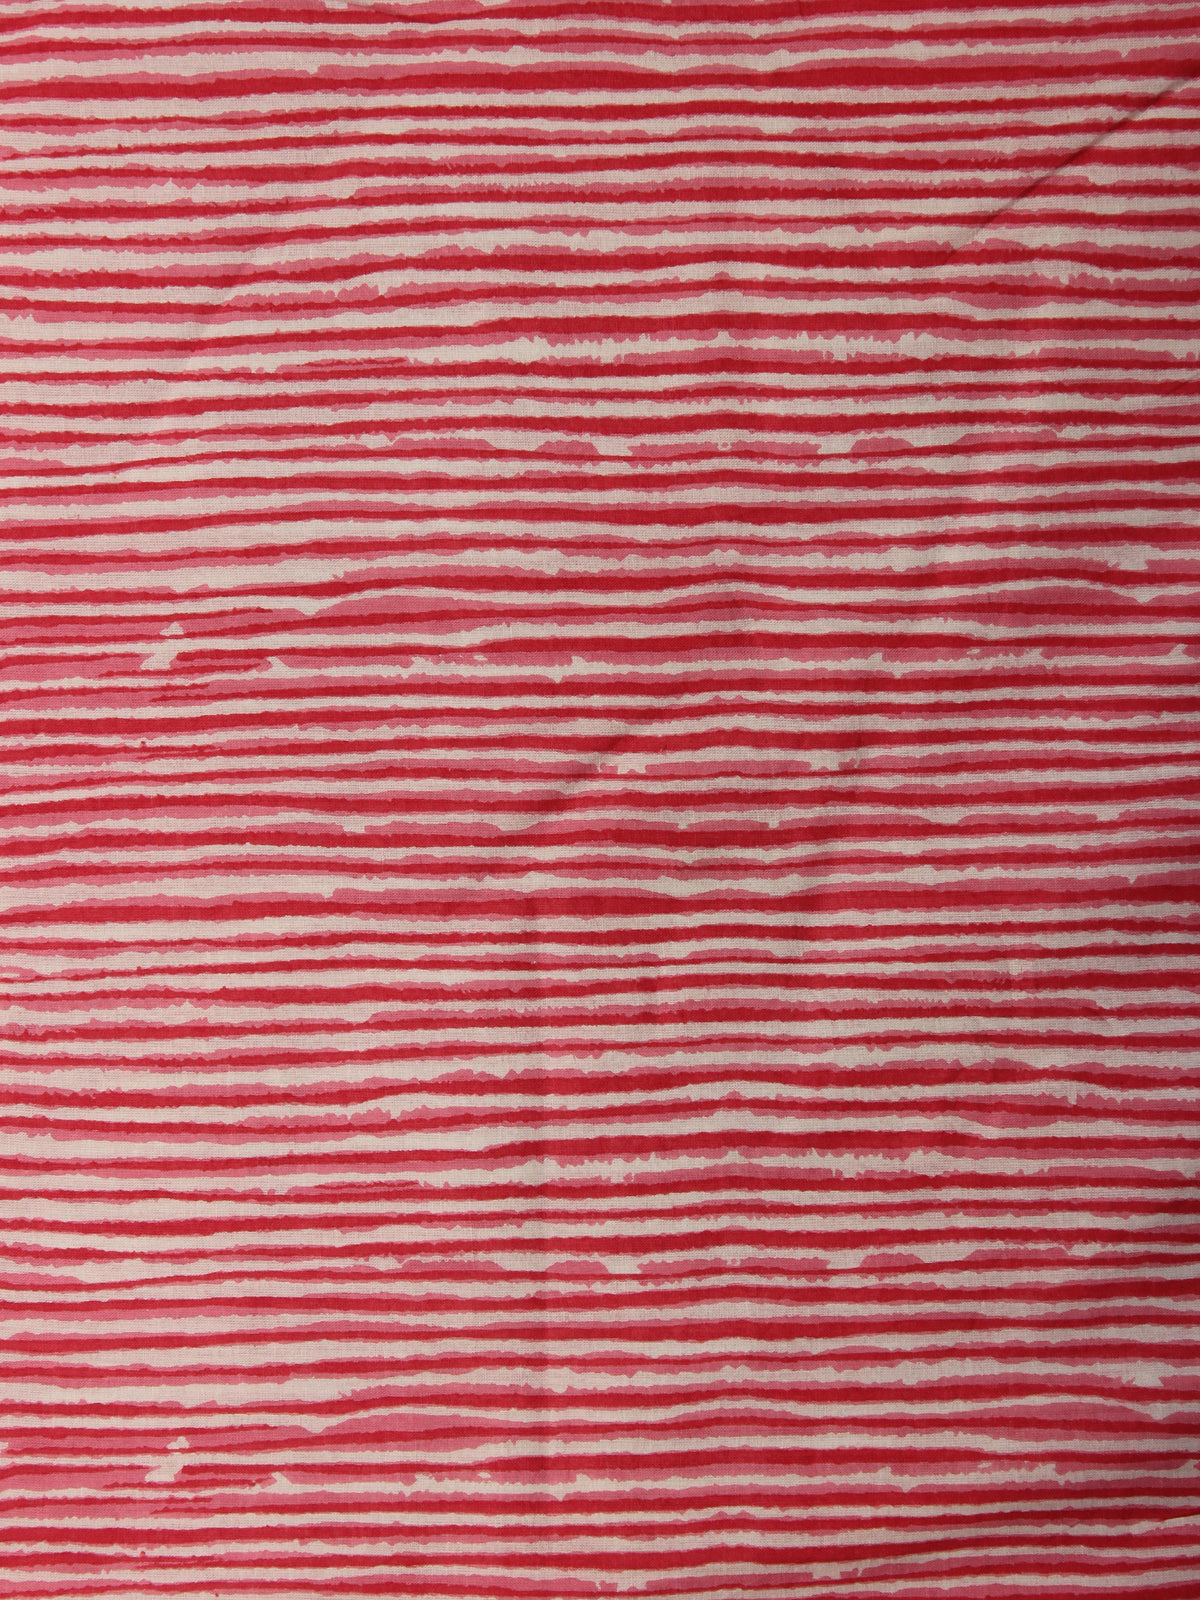 Pink Ivory Hand Block Printed Cotton Fabric Per Meter - F001F2012